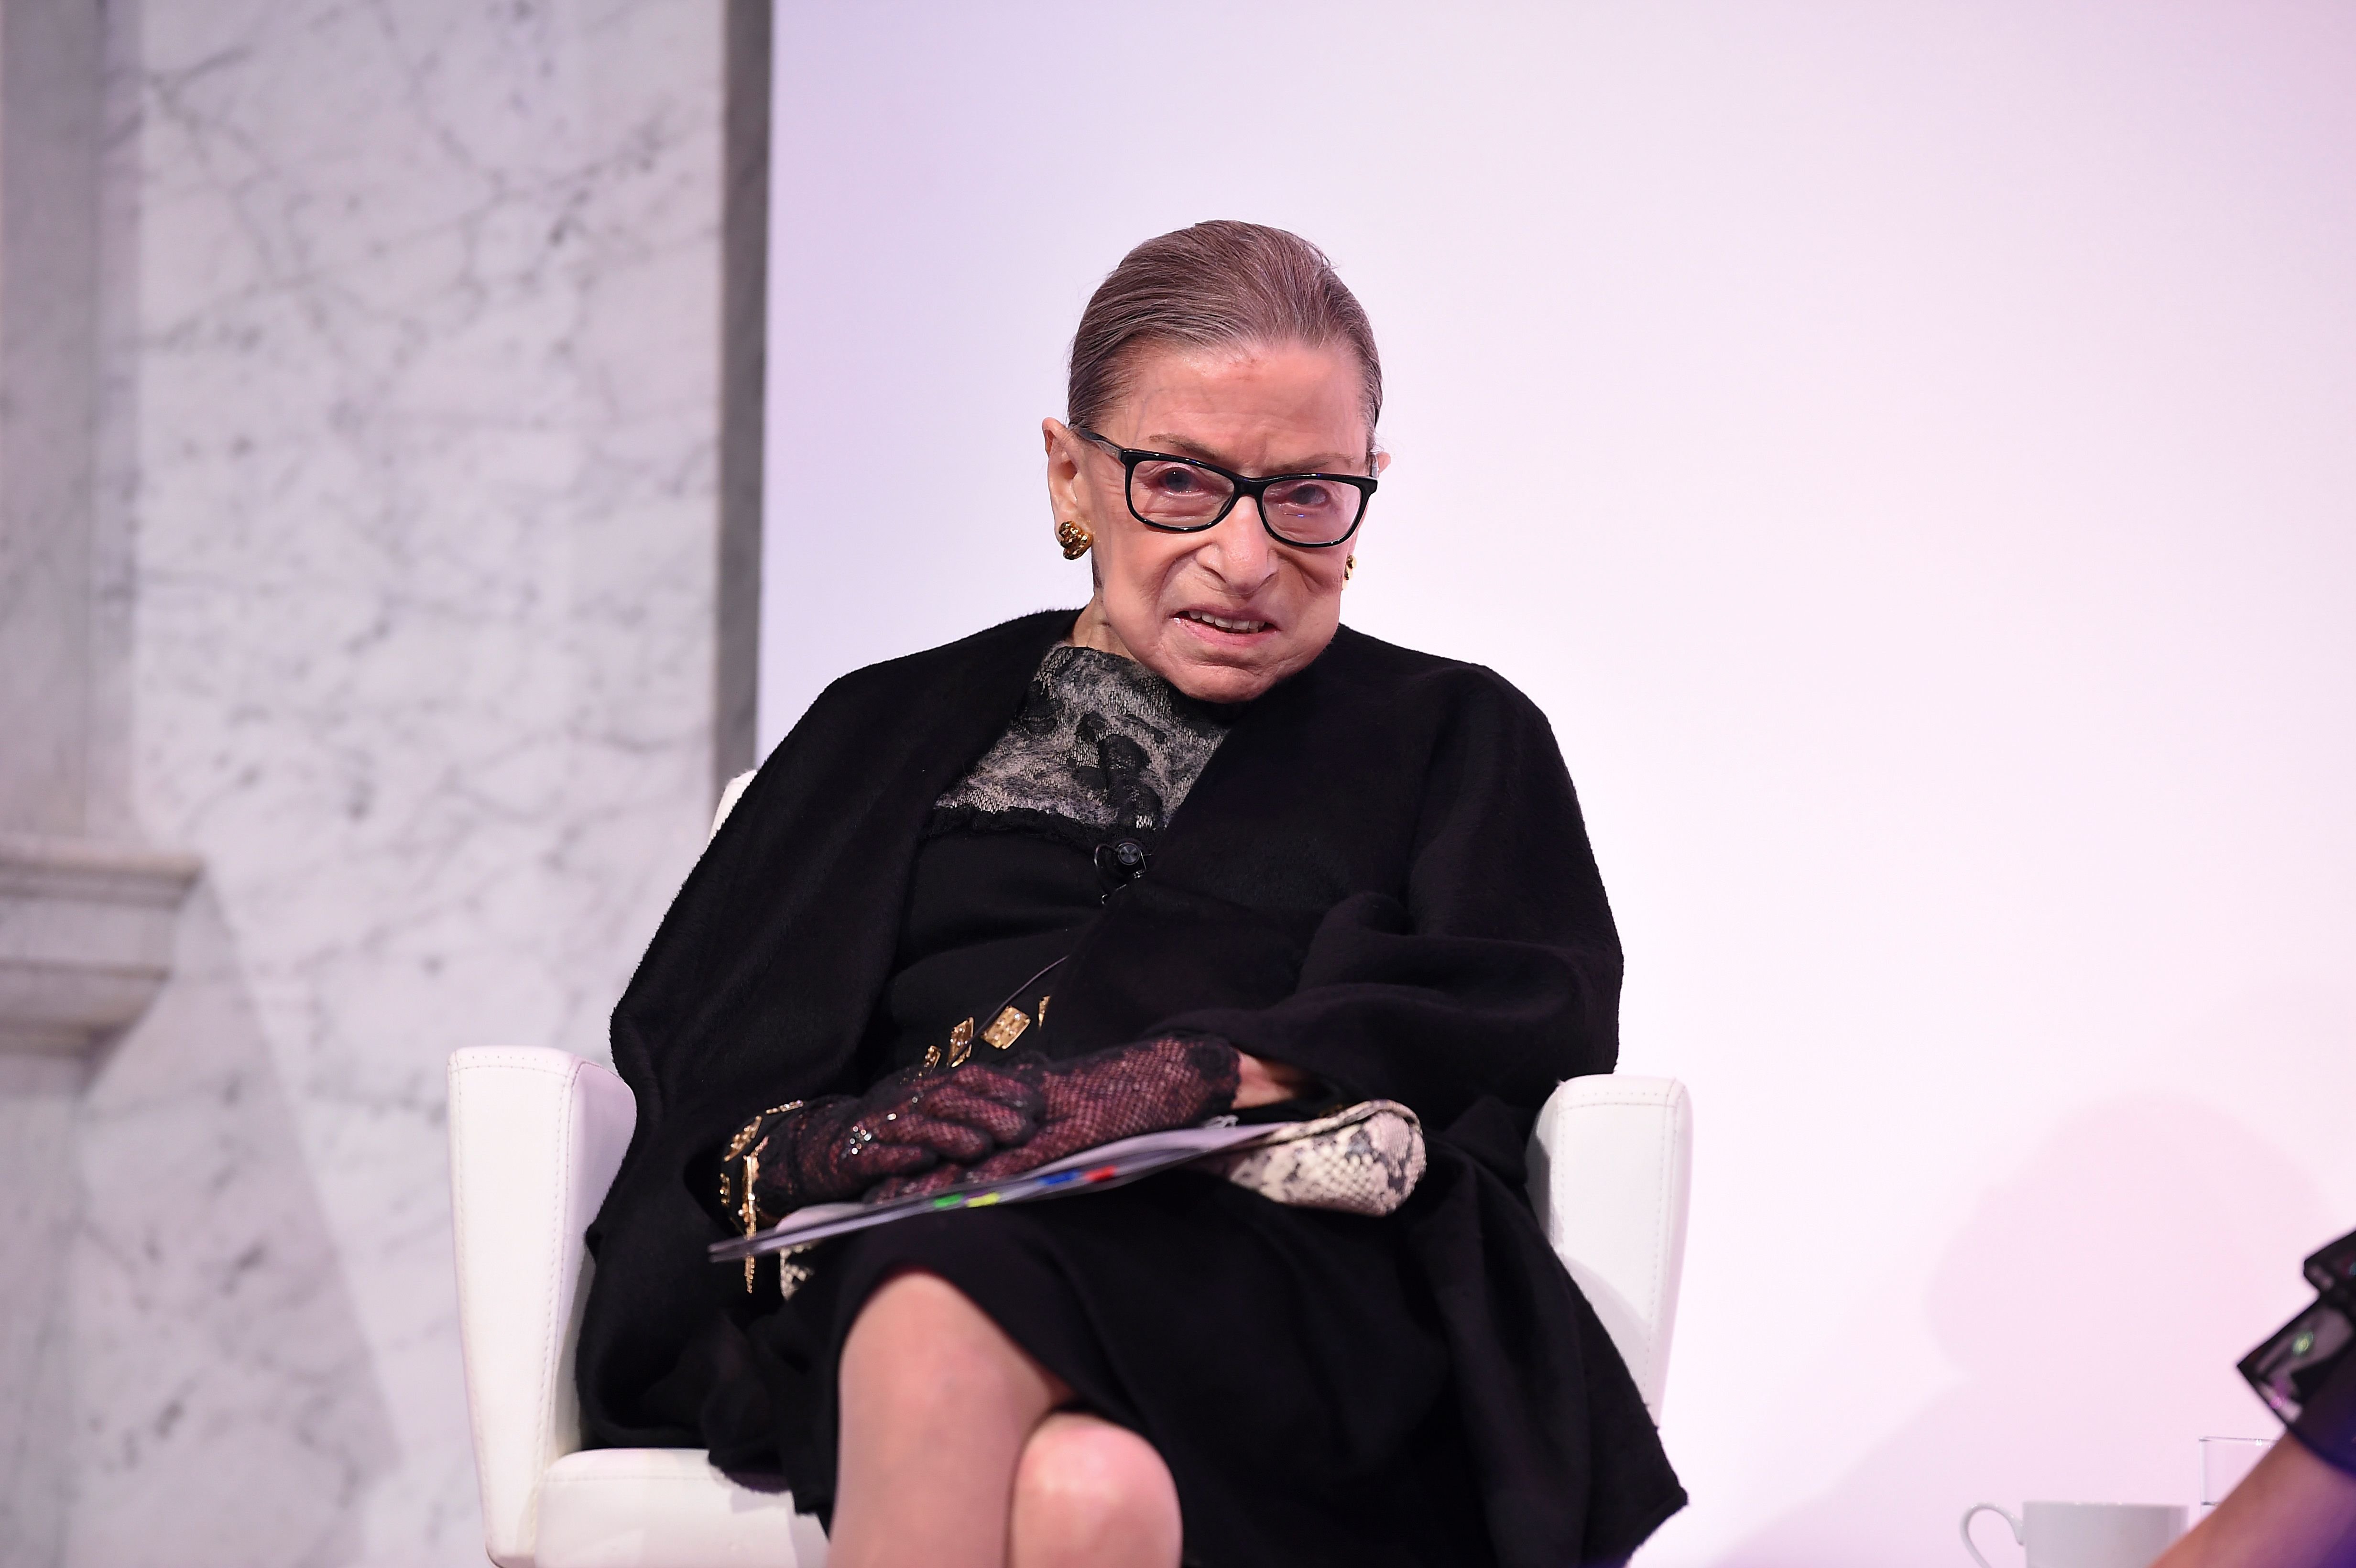 Supreme Court Justice Ruth Bader Ginsburg at the 2020 DVF Awards on February 19, 2020 | Photo: Getty Images